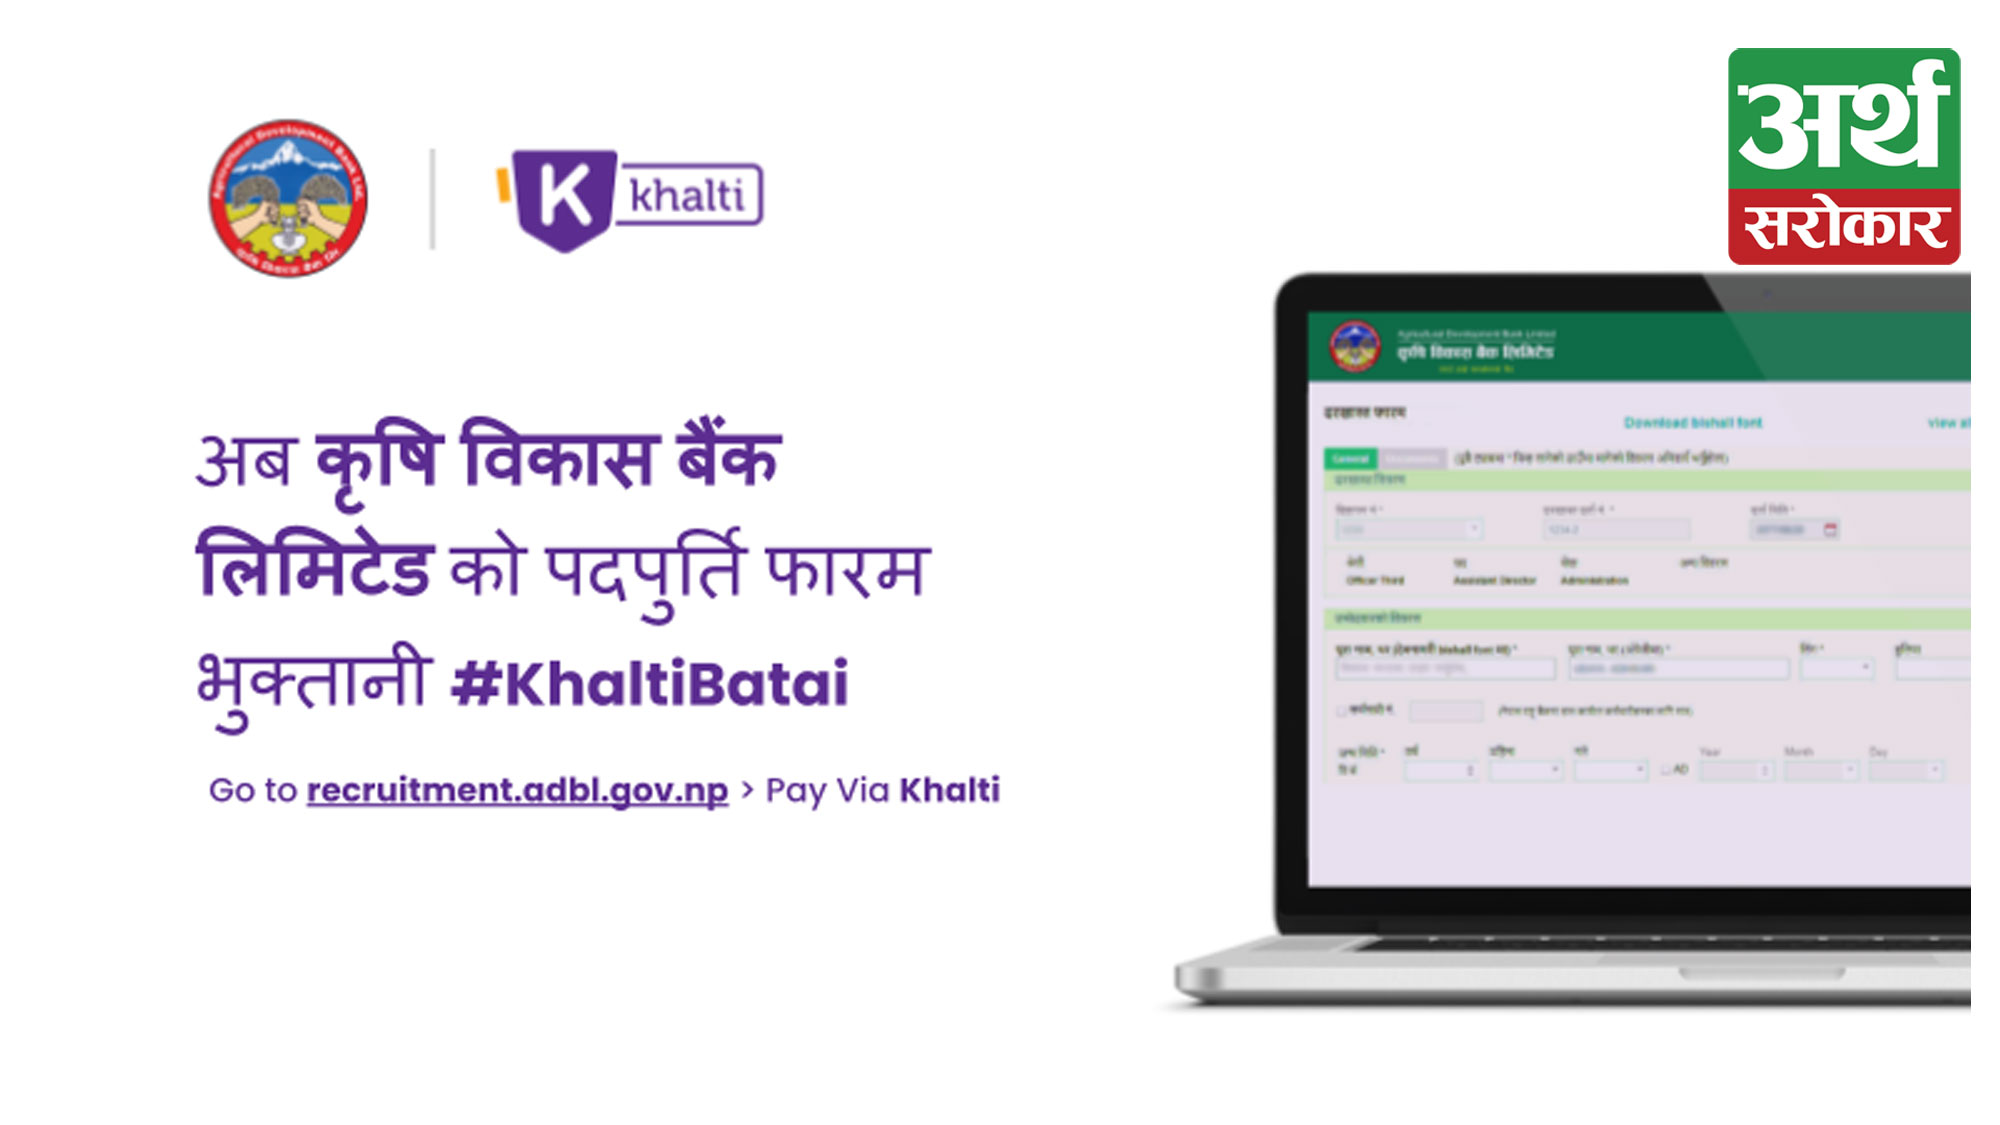 Pay Agriculture Development Bank’s vacancy application form fee from Khalti Digital Wallet.